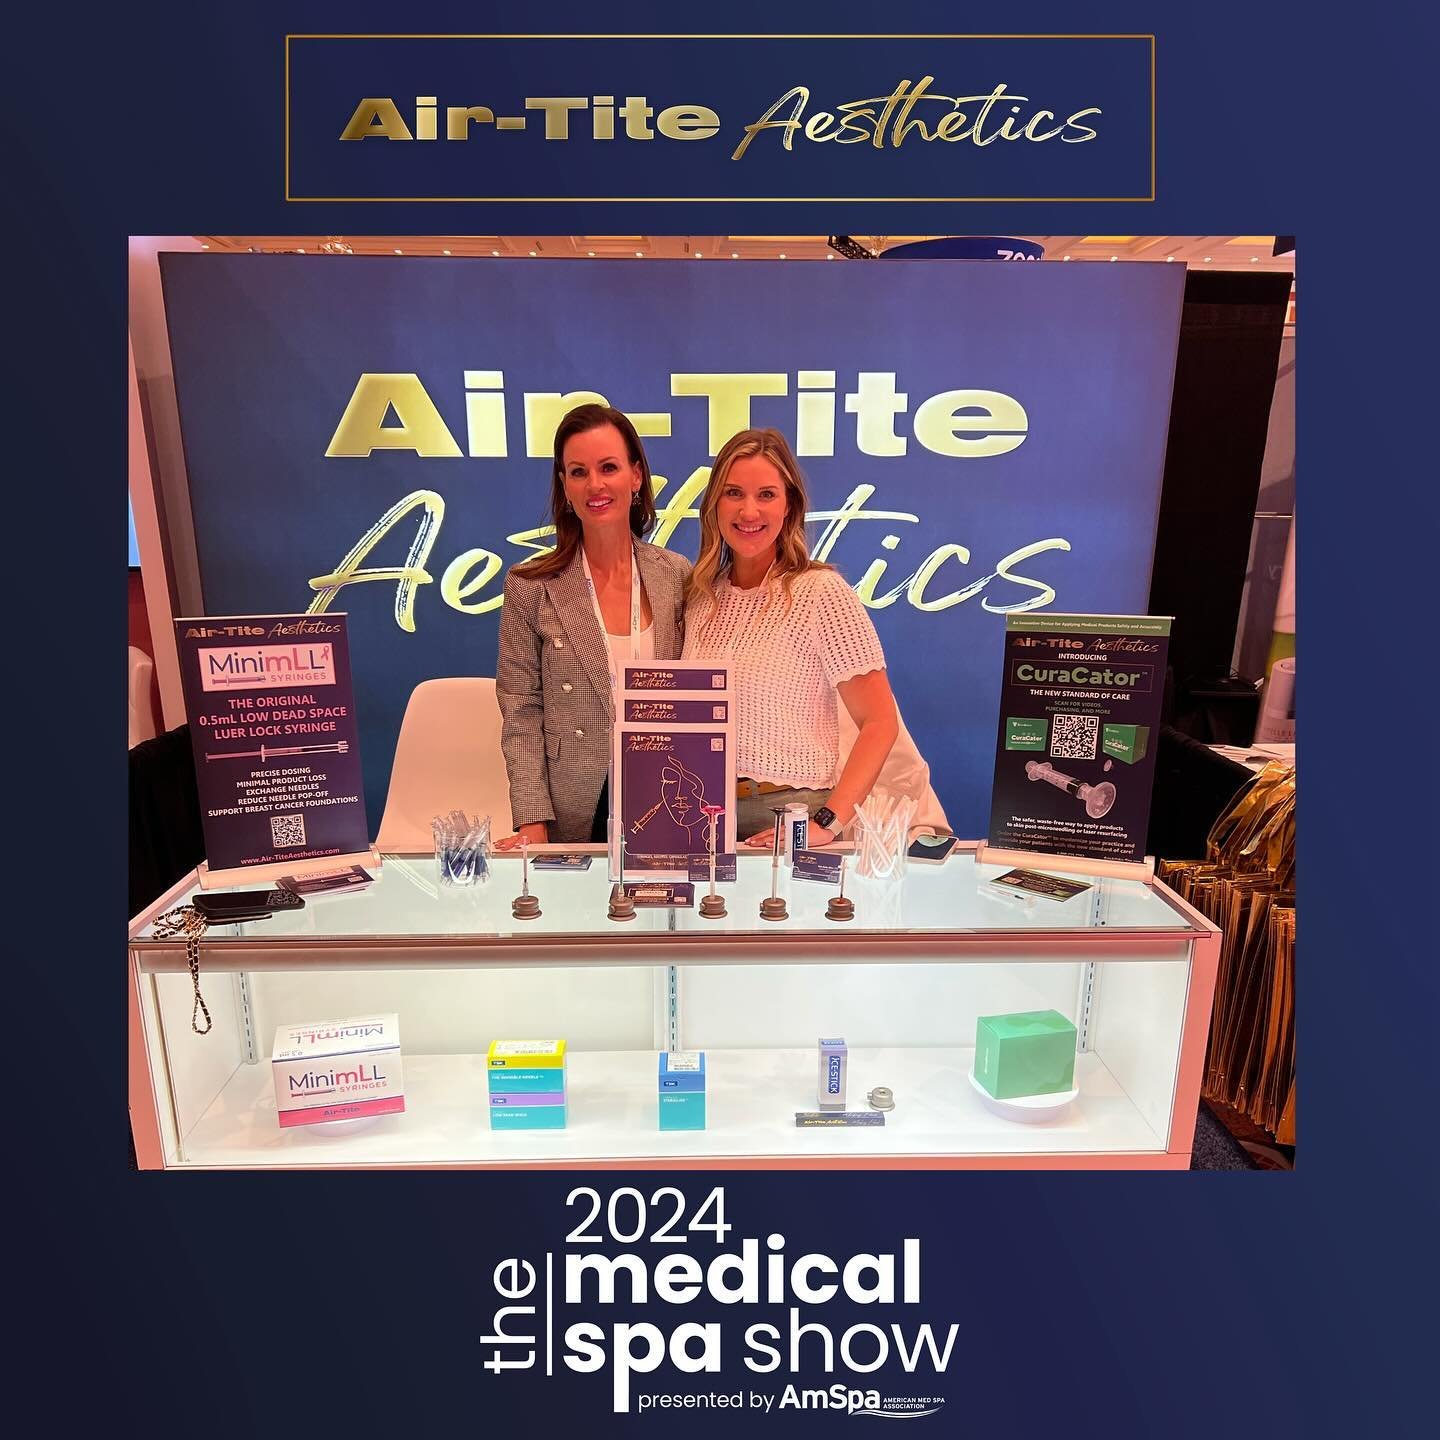 We were lucky to have Yvonne Dellos of @medicalaestheticartinstitute stop by our booth this weekend at the medical spa show! We hope you were able to check out her presentation! 
#MSS24 #MedicalSpaShow #MedSpa #Amspa